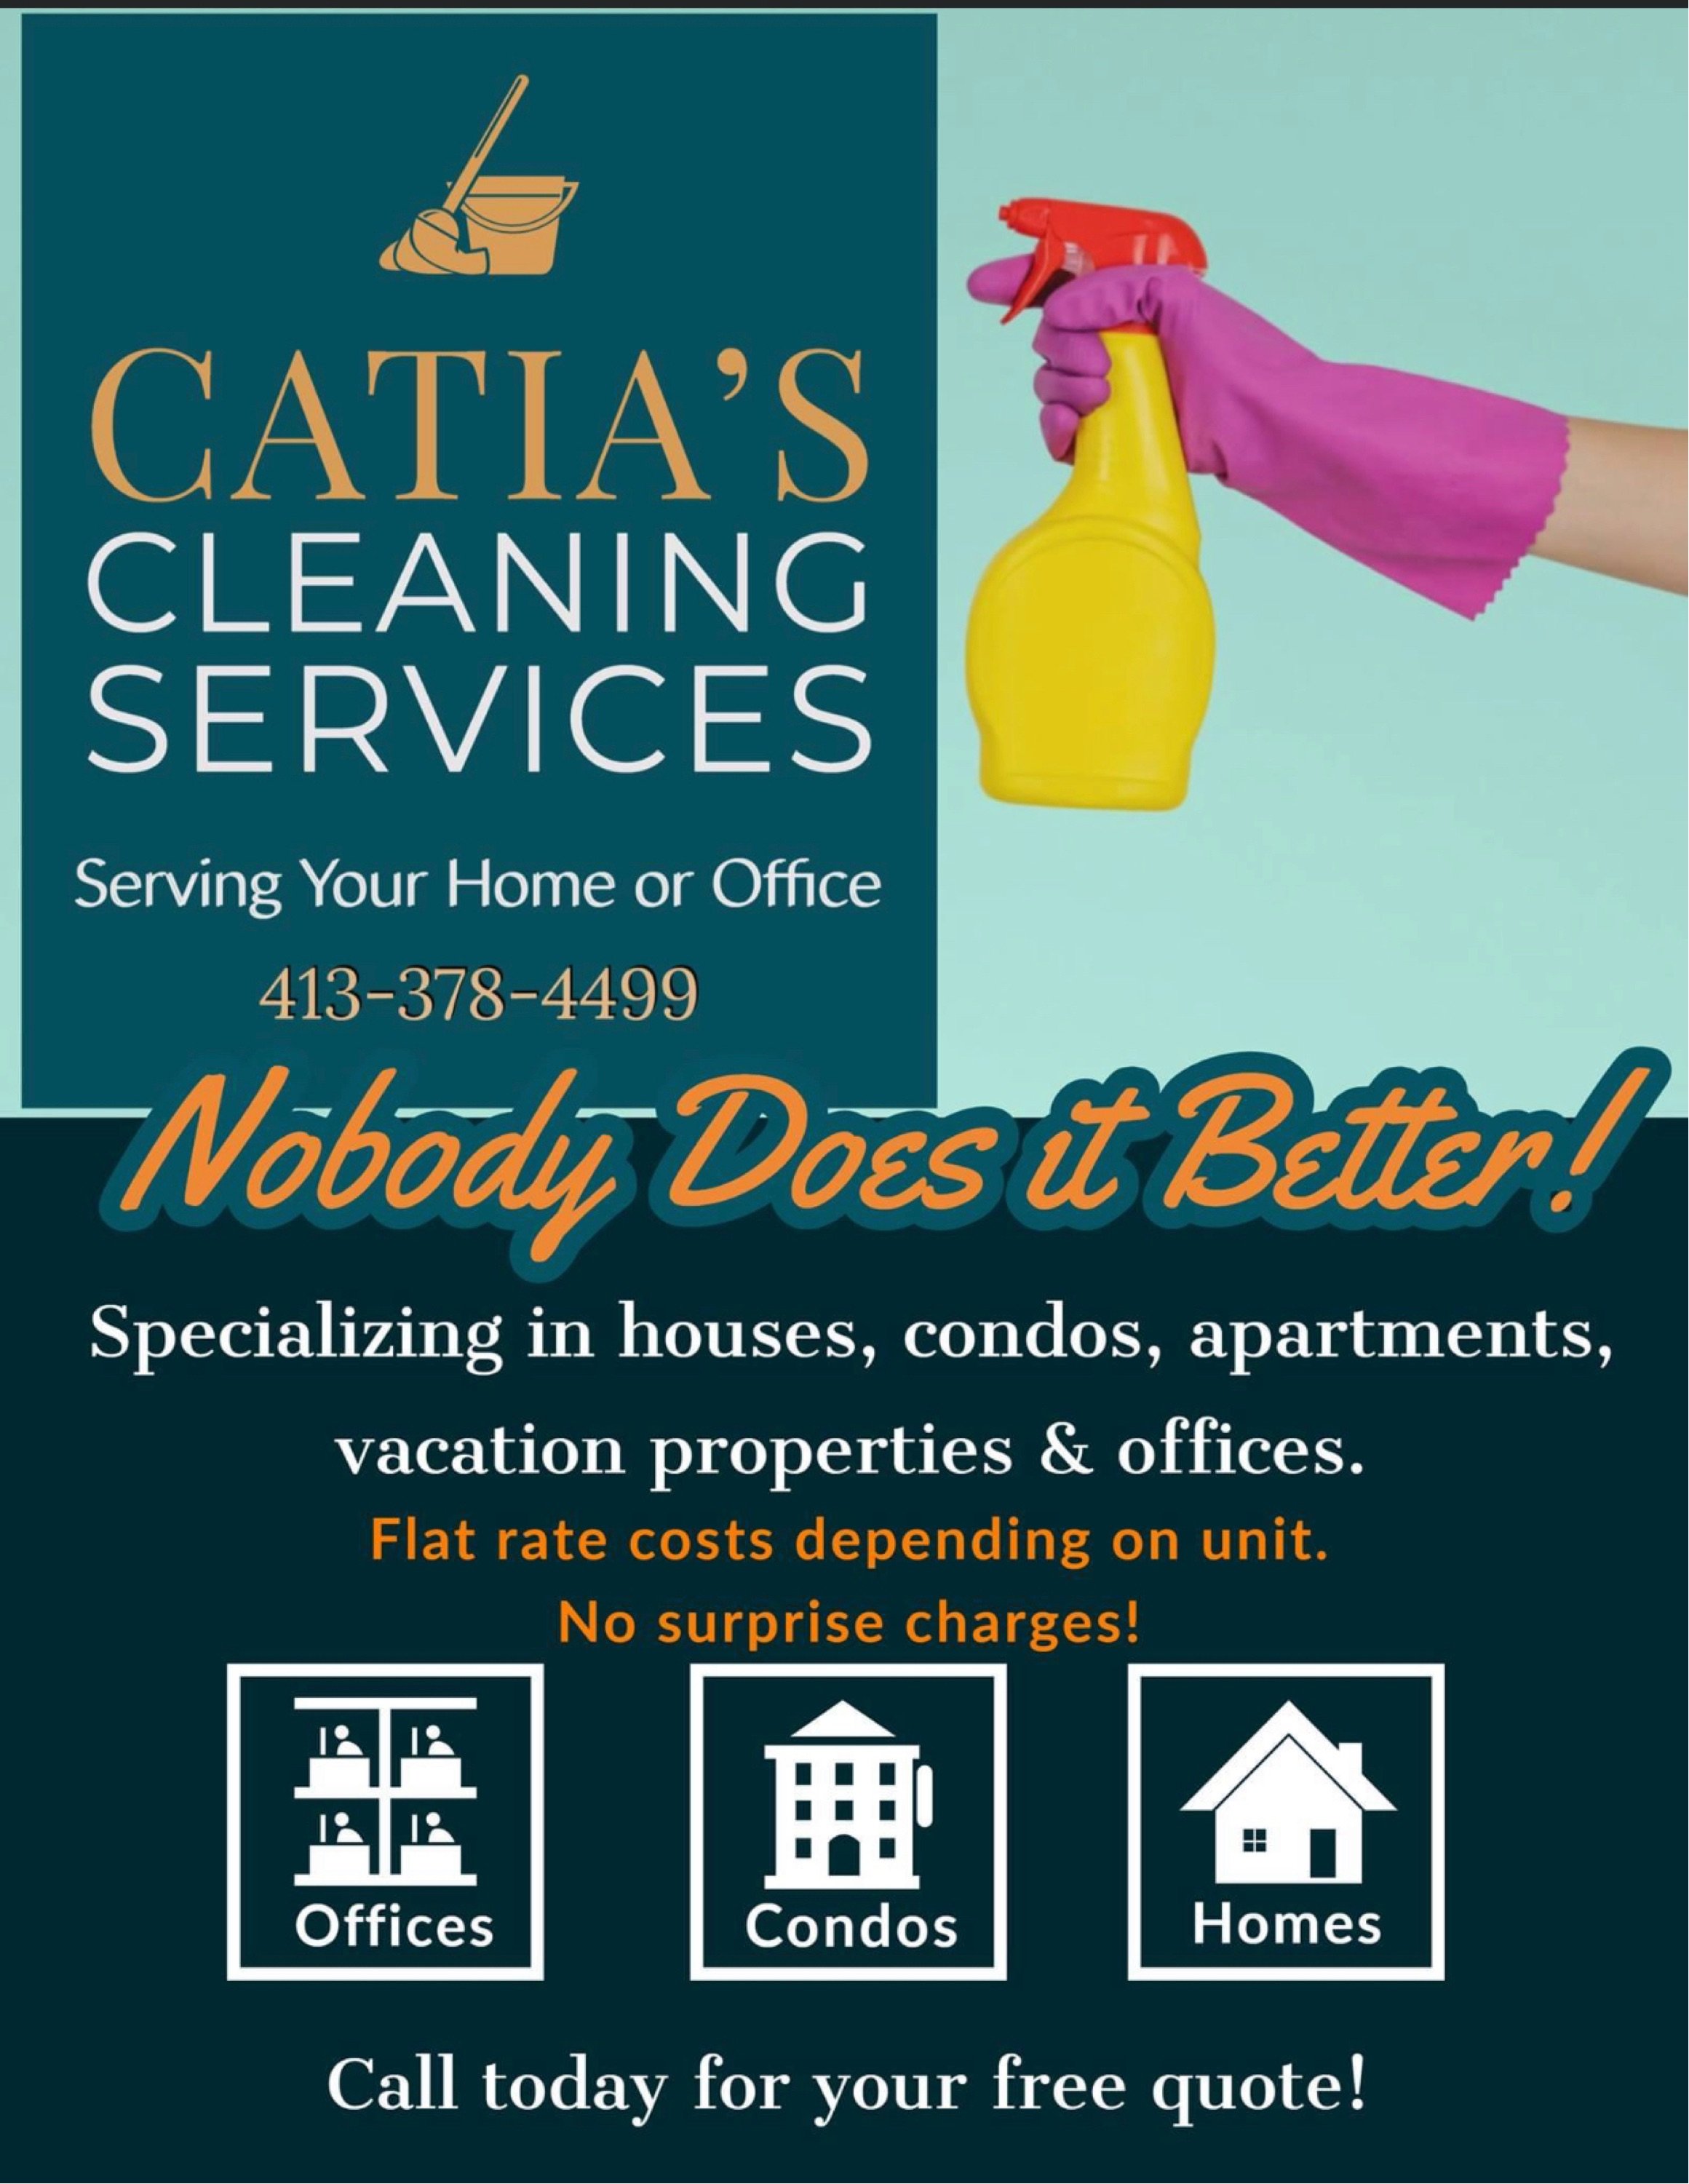 Catia's Cleaning Service Logo